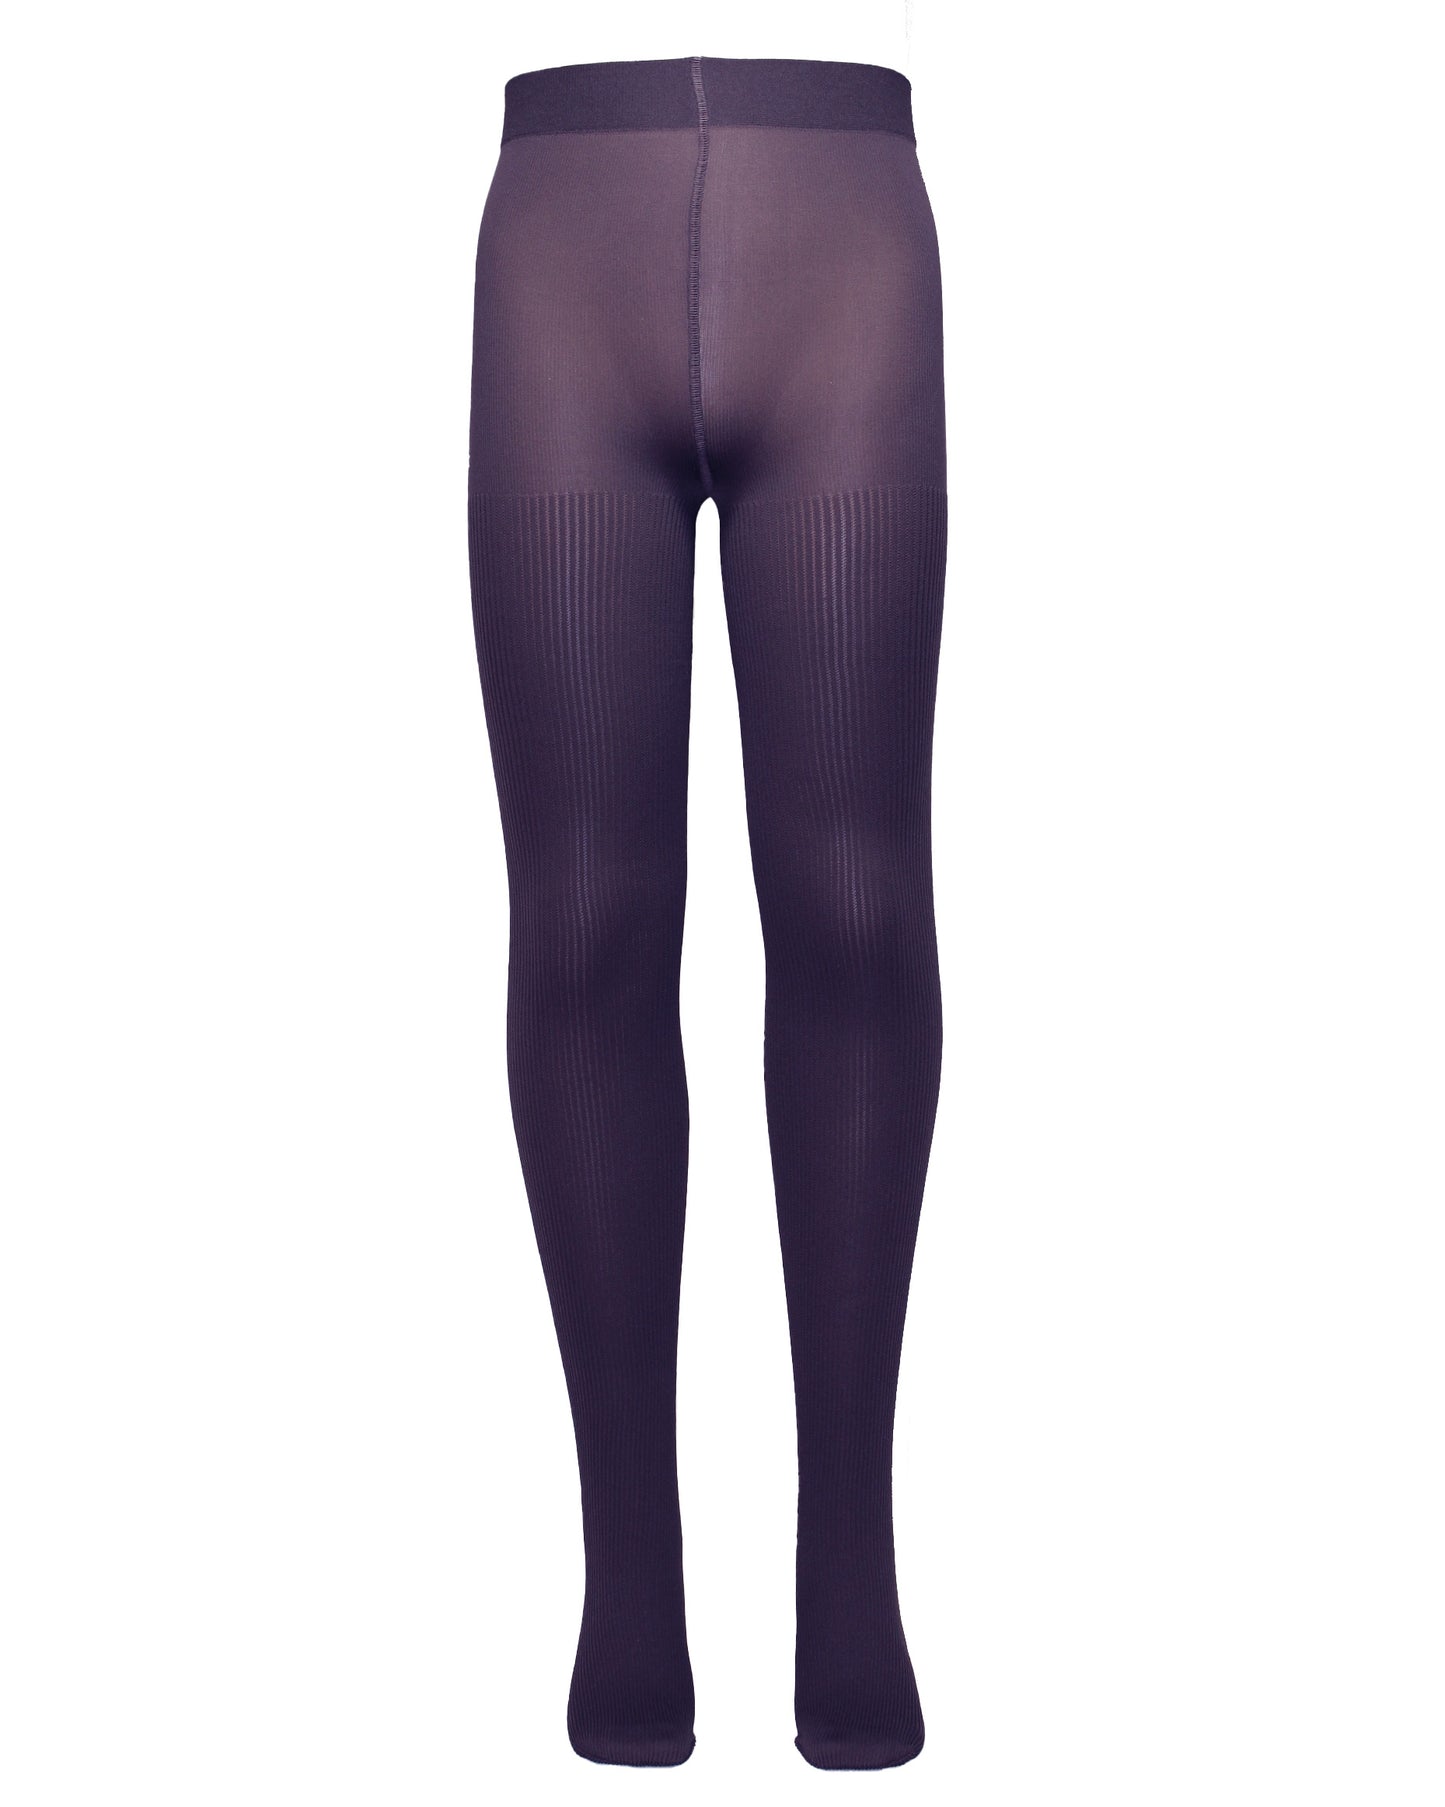 Omsa Serenella Cinderella Collant - Dark purple soft opaque ribbed children's tights with a plain smooth boxer top and deep comfort waist band.